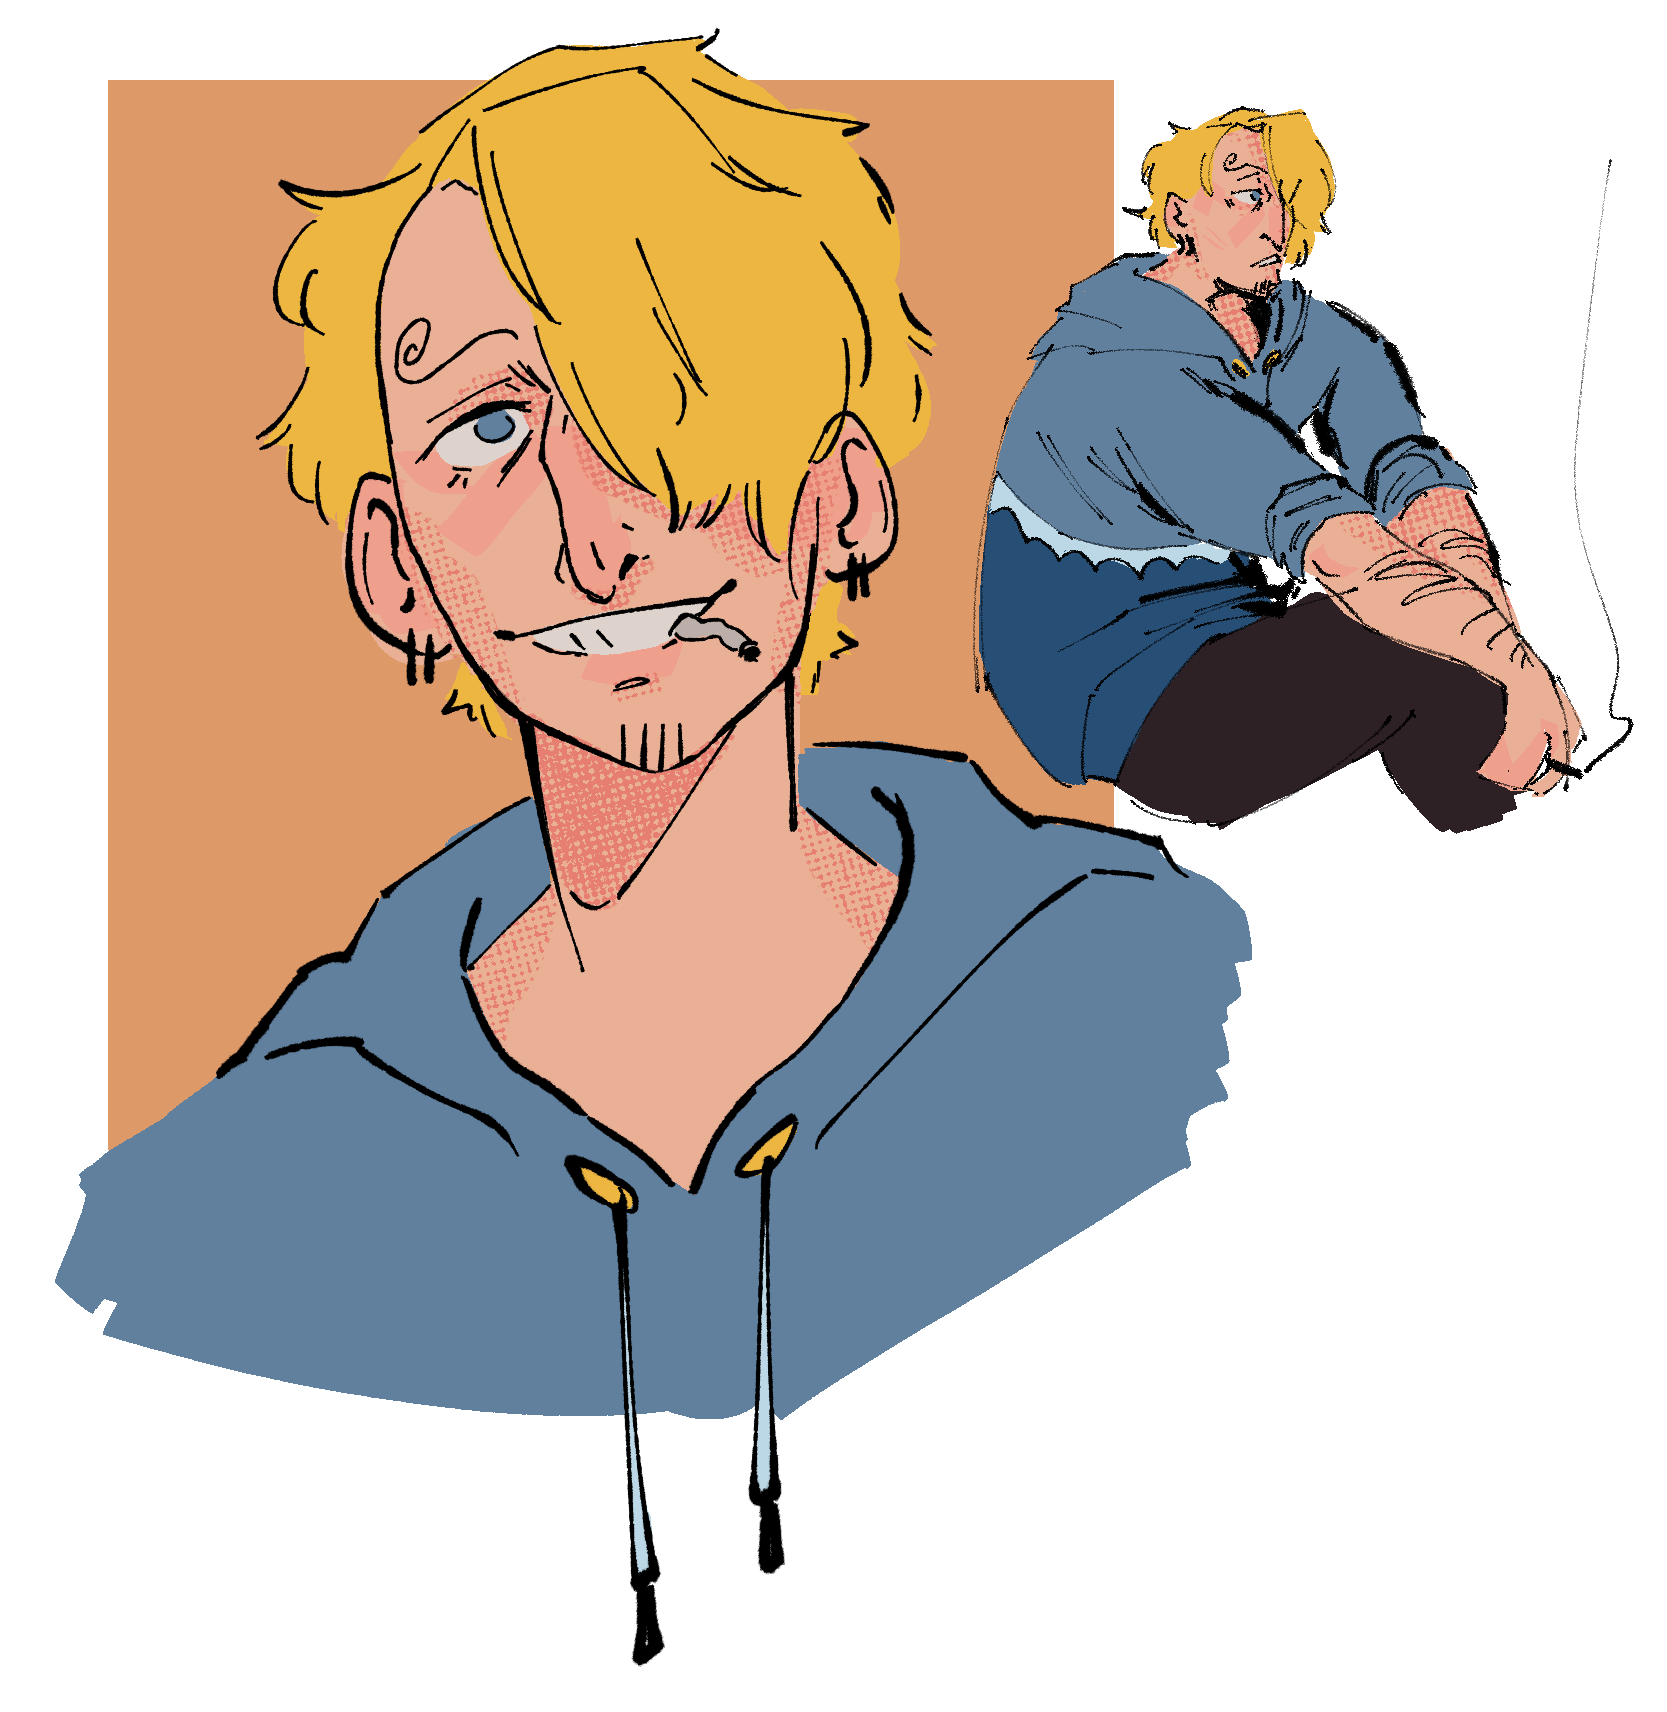 Two digital drawings of Sanji from One Piece. The first is a portrait of him smiling brightly at the viewer. The second is a smaller half-body drawing of him, sitting slouched and looking at something unseen. In both, he is wearing his blue hoodie and is minimally shaded, with just simple shading on his skin. 